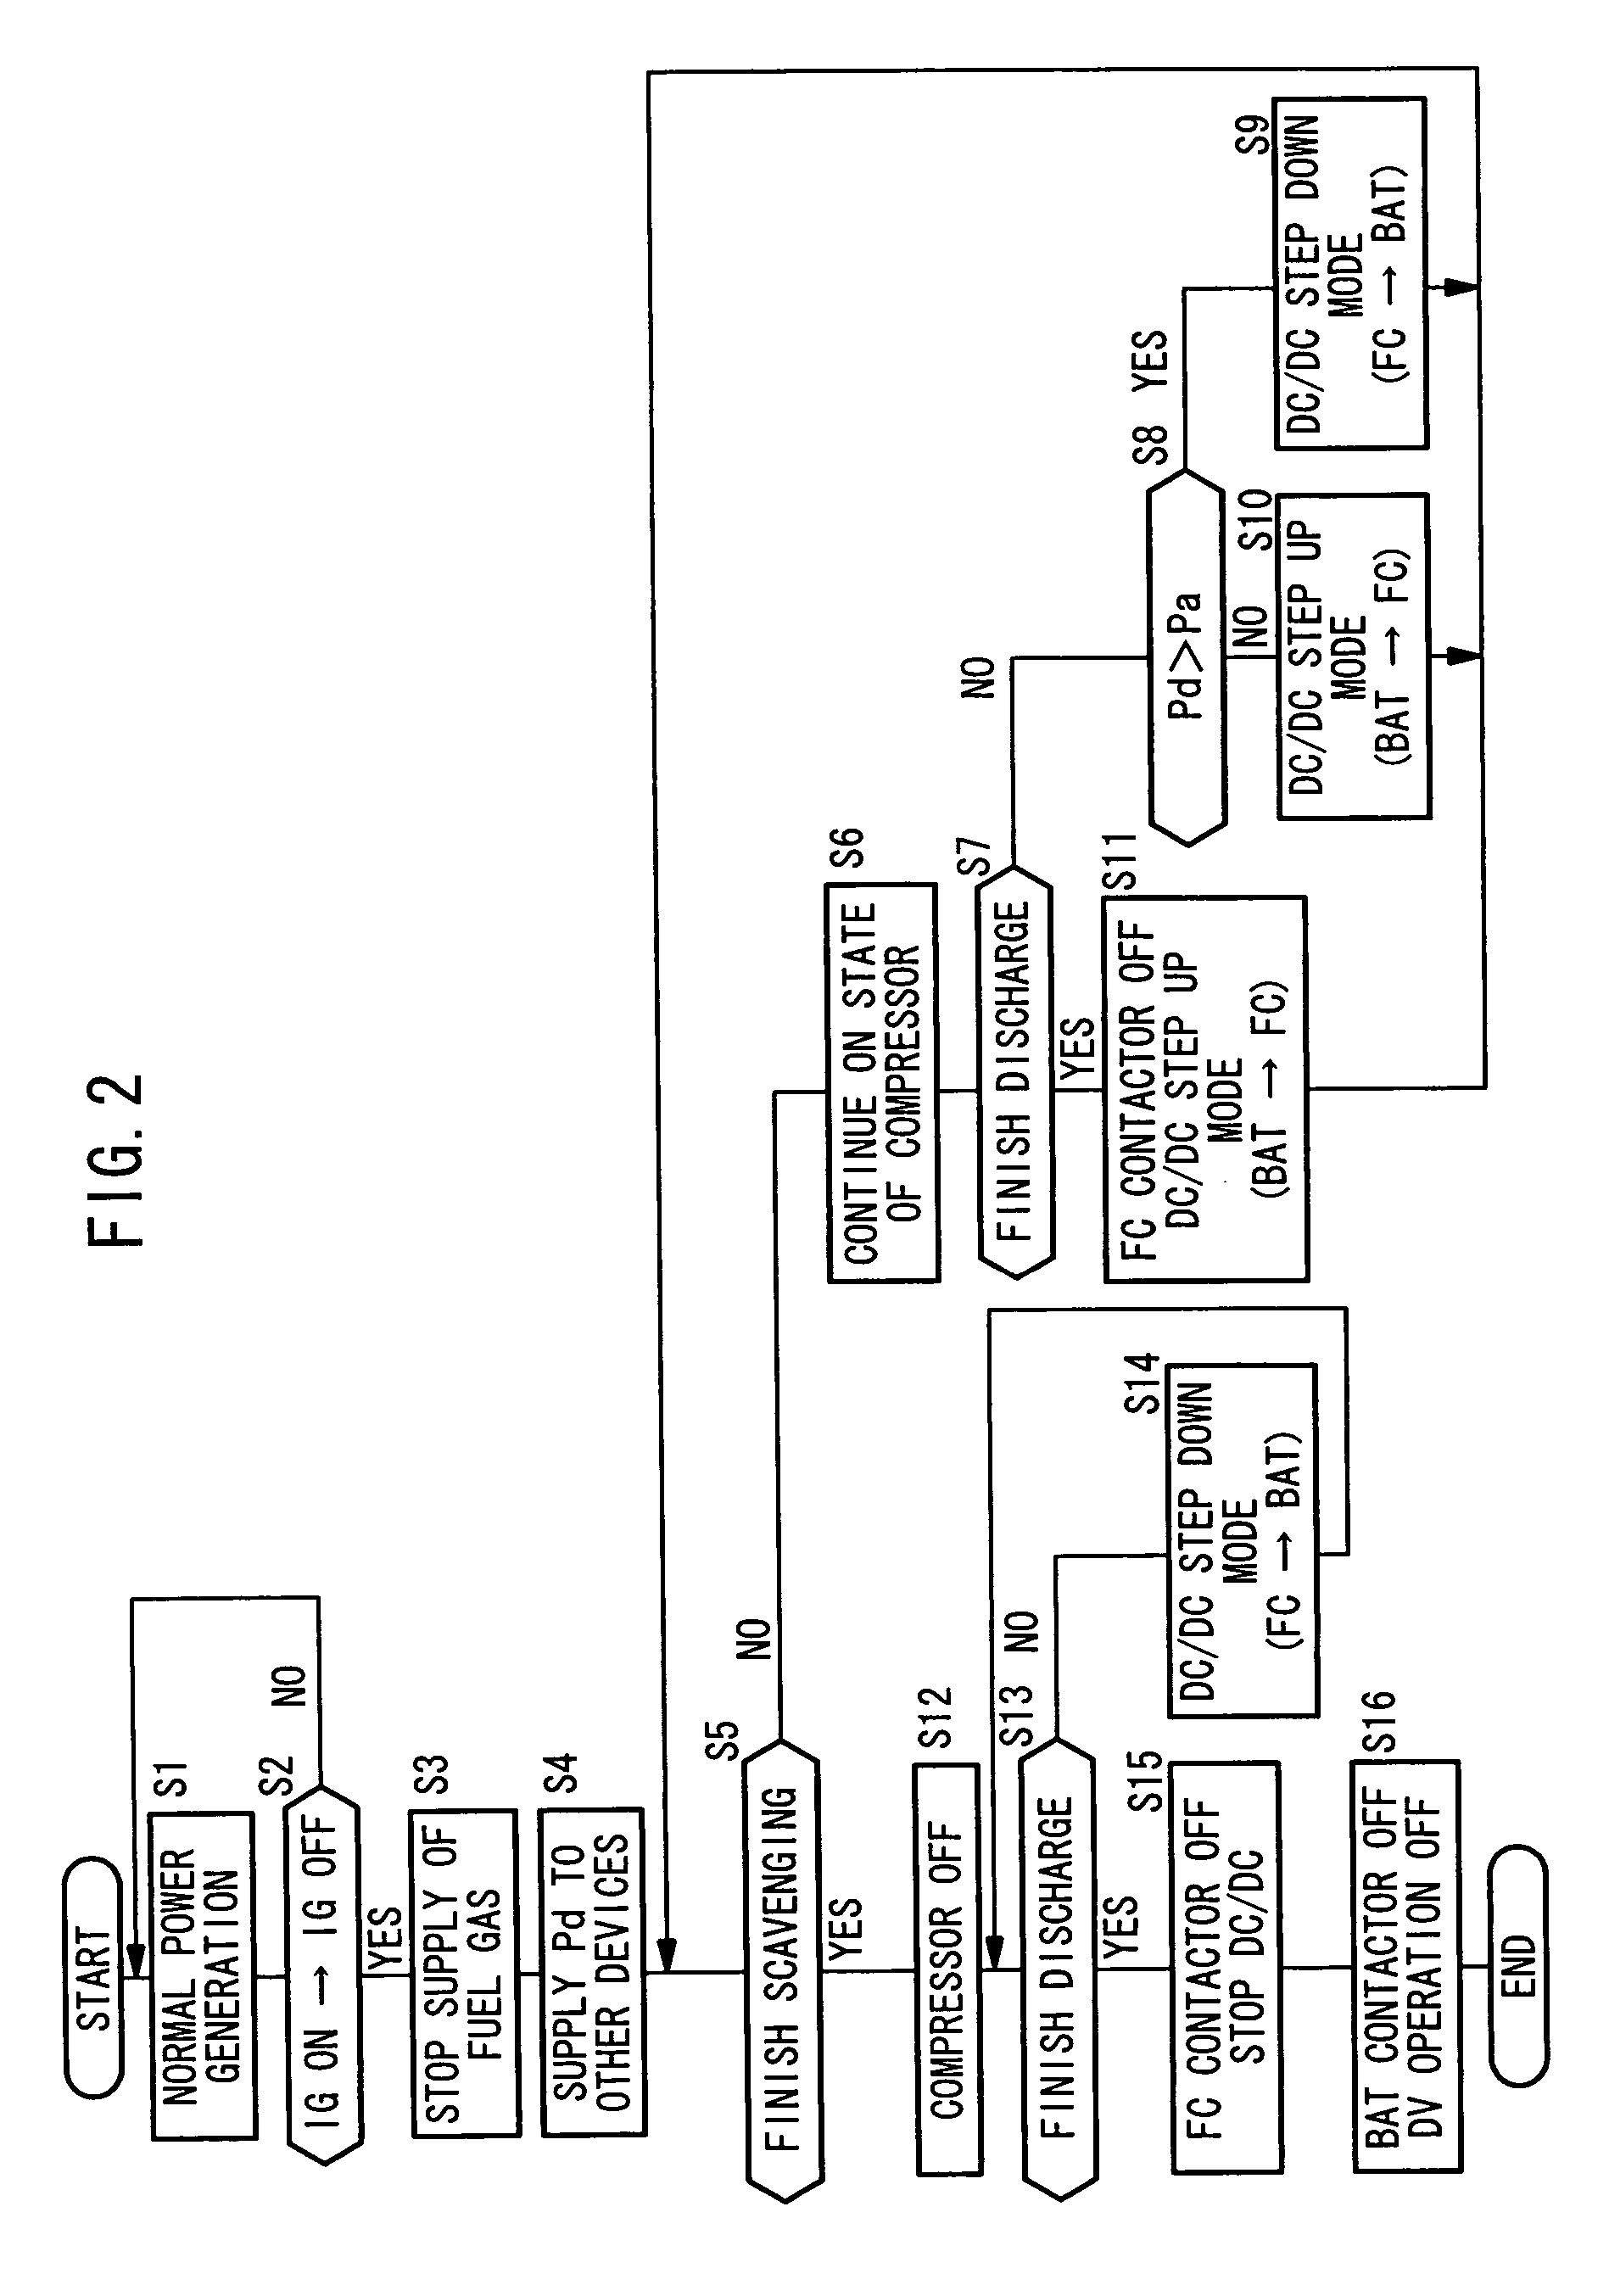 Fuel cell system and method of controlling electrical energy discharged in the fuel cell system